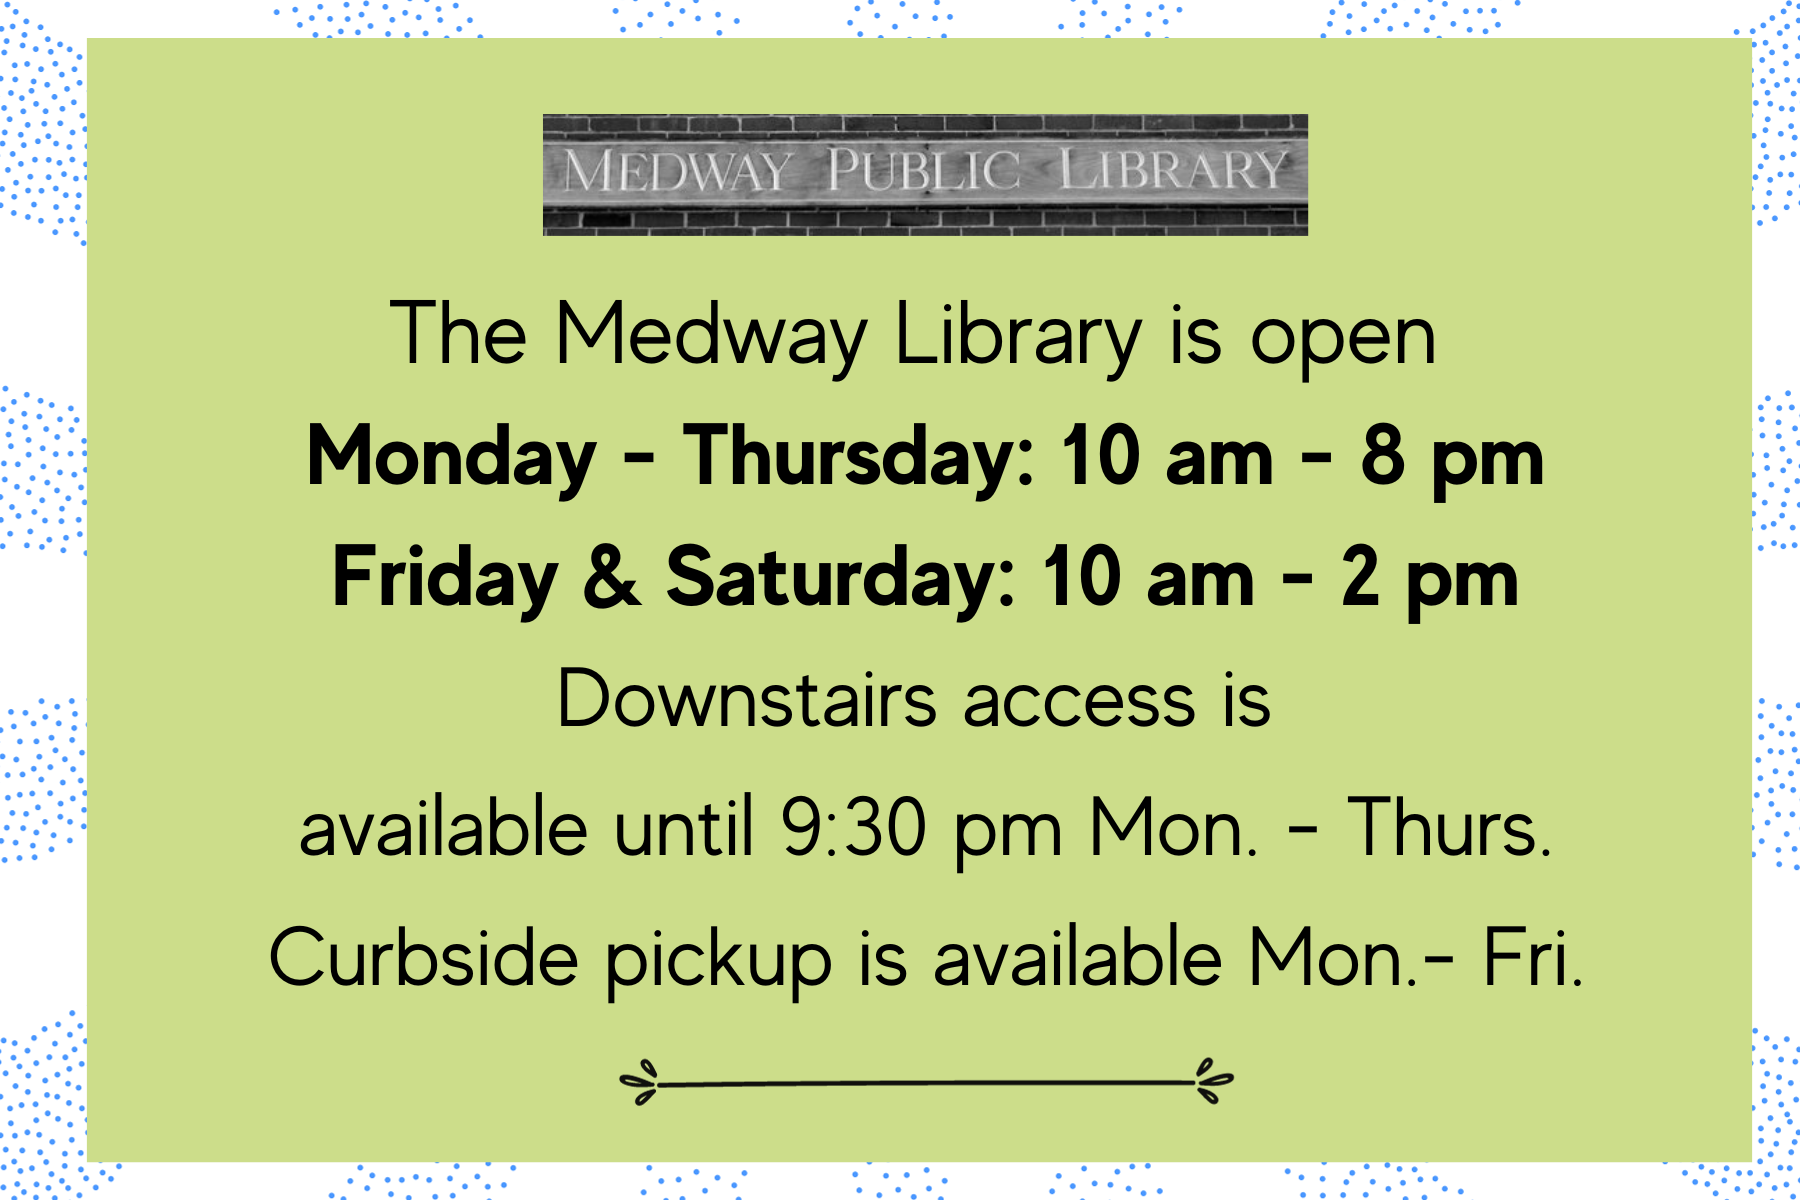 The Medway Library is open  Monday - Thursday: 10 am - 8 pm Friday & Saturday: 10 am - 2 pm. Closed Saturday during July & August. Downstairs access is  available until 9:30 pm Mon. - Thurs. Curbside pickup is available Mon.- Fri.